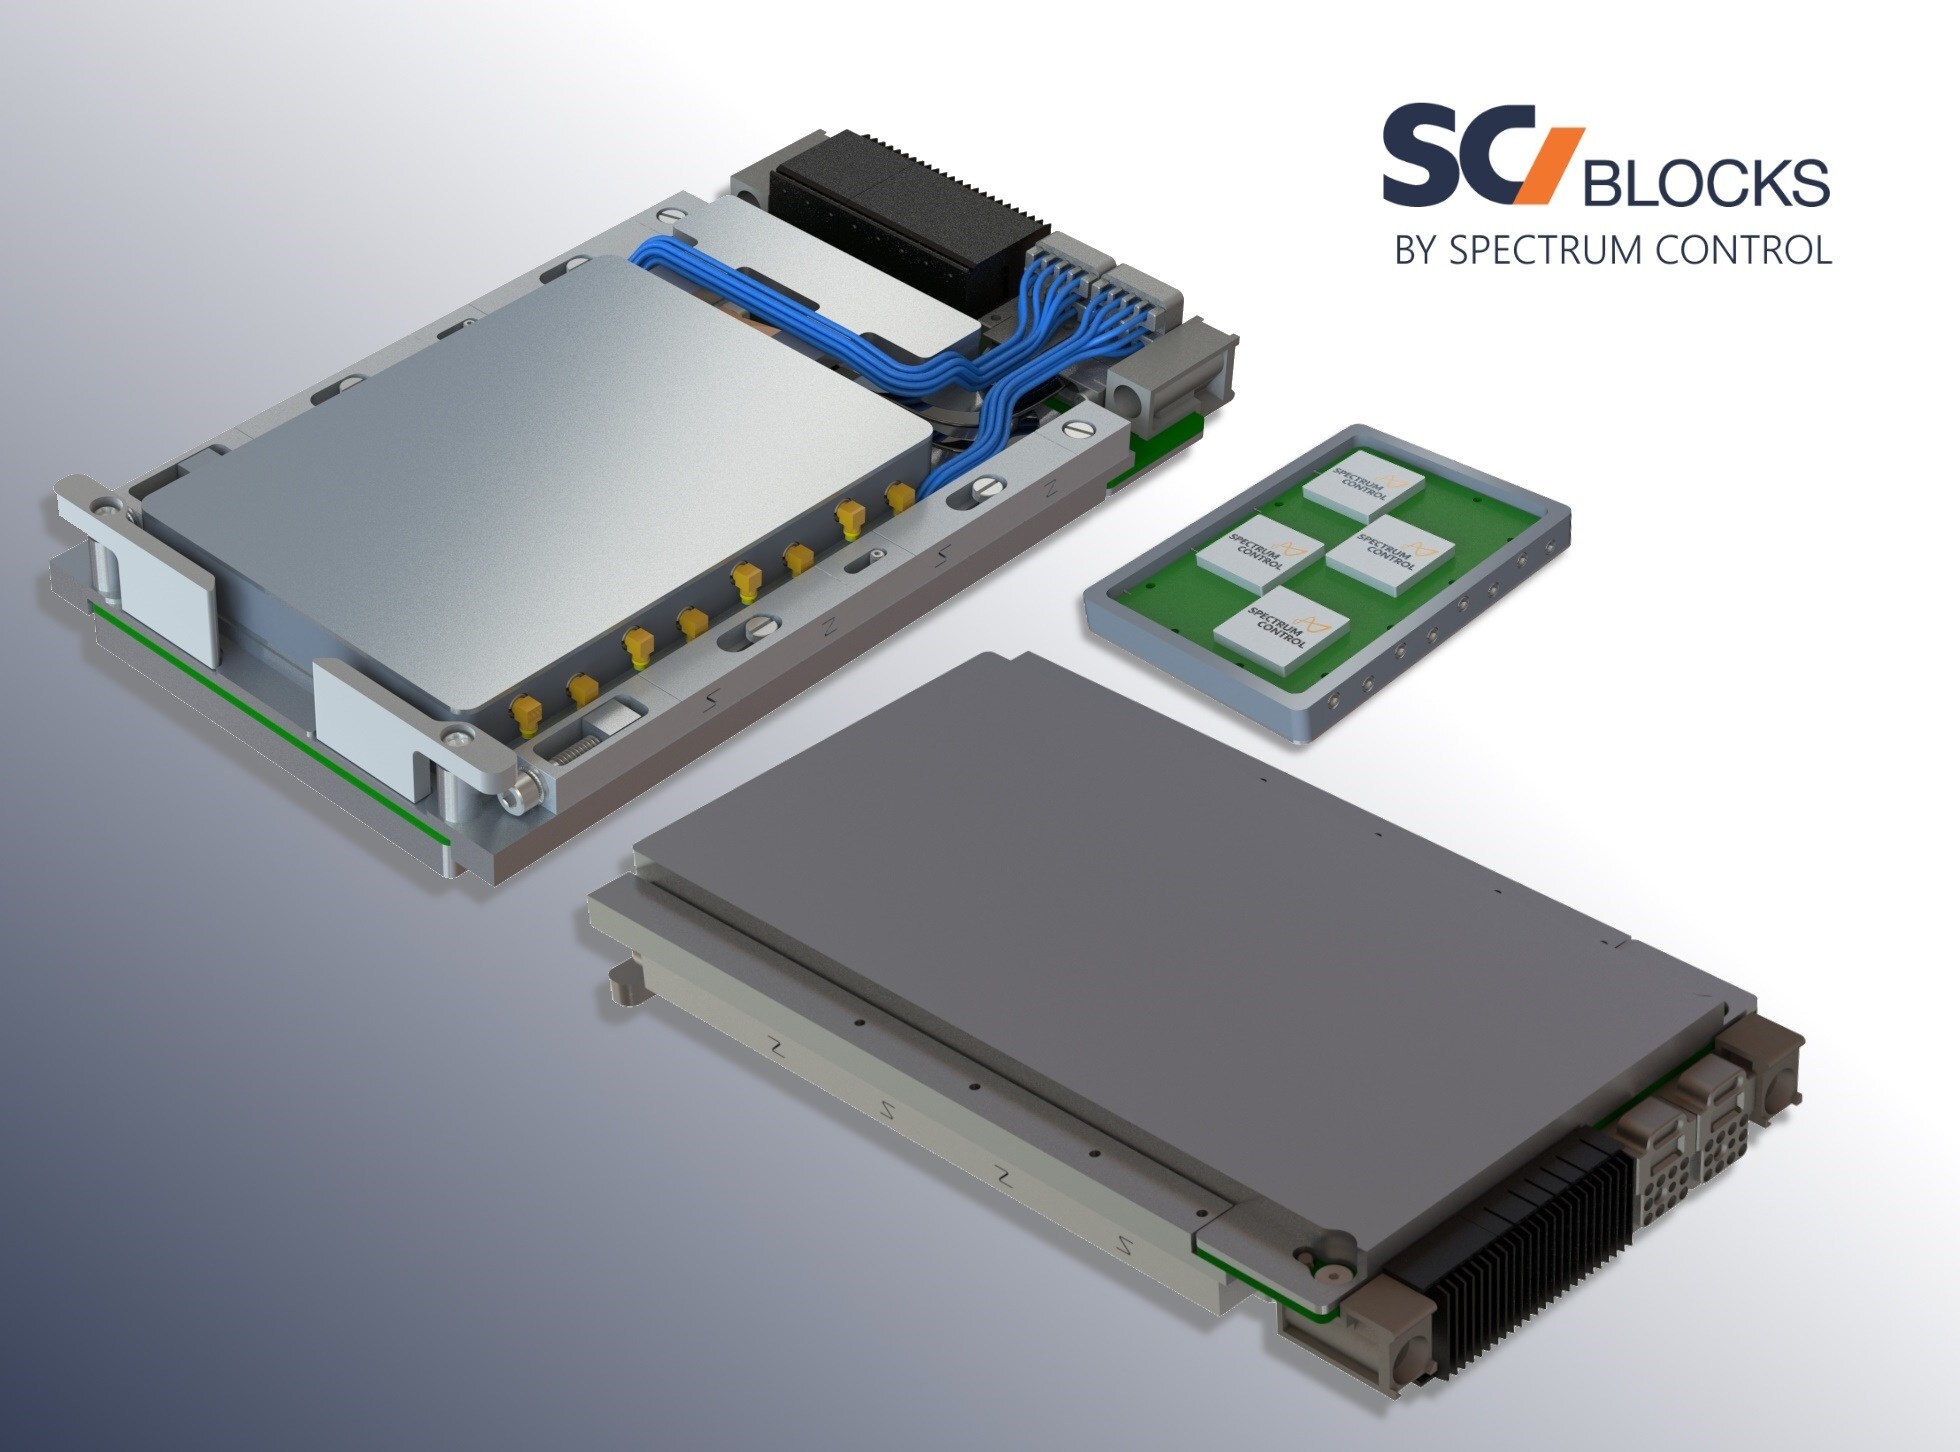 The new DirectRF+™ module from Spectrum Control enables customers to rapidly deploy configurable wideband RF front-ends with high-speed digital signal conversion.